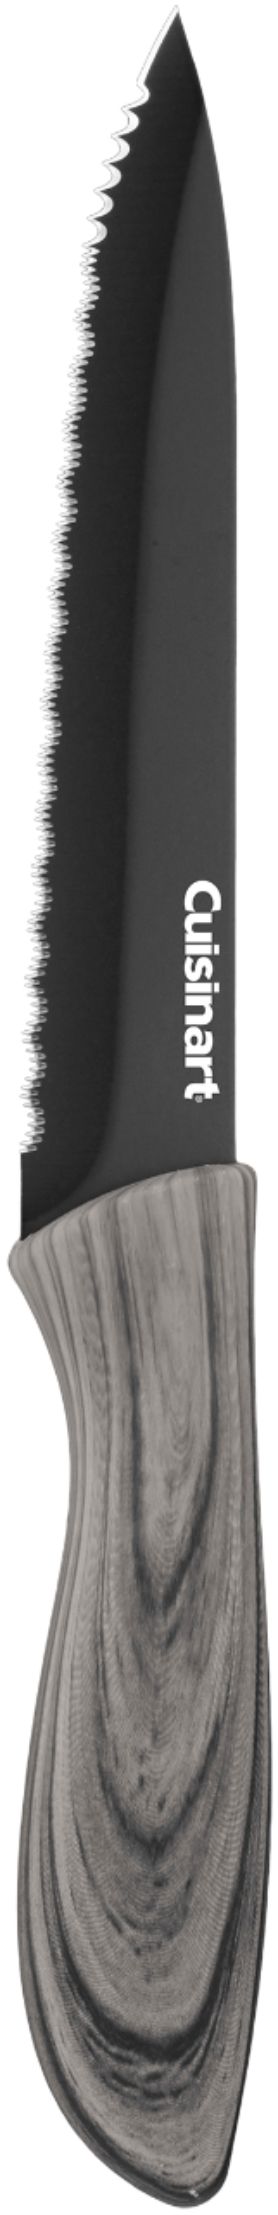 Cuisinart C55-10PCERM 10 Piece Ceramic Coated Knife Set with Blade Guards  (5 knives and 5 knife covers), Multi